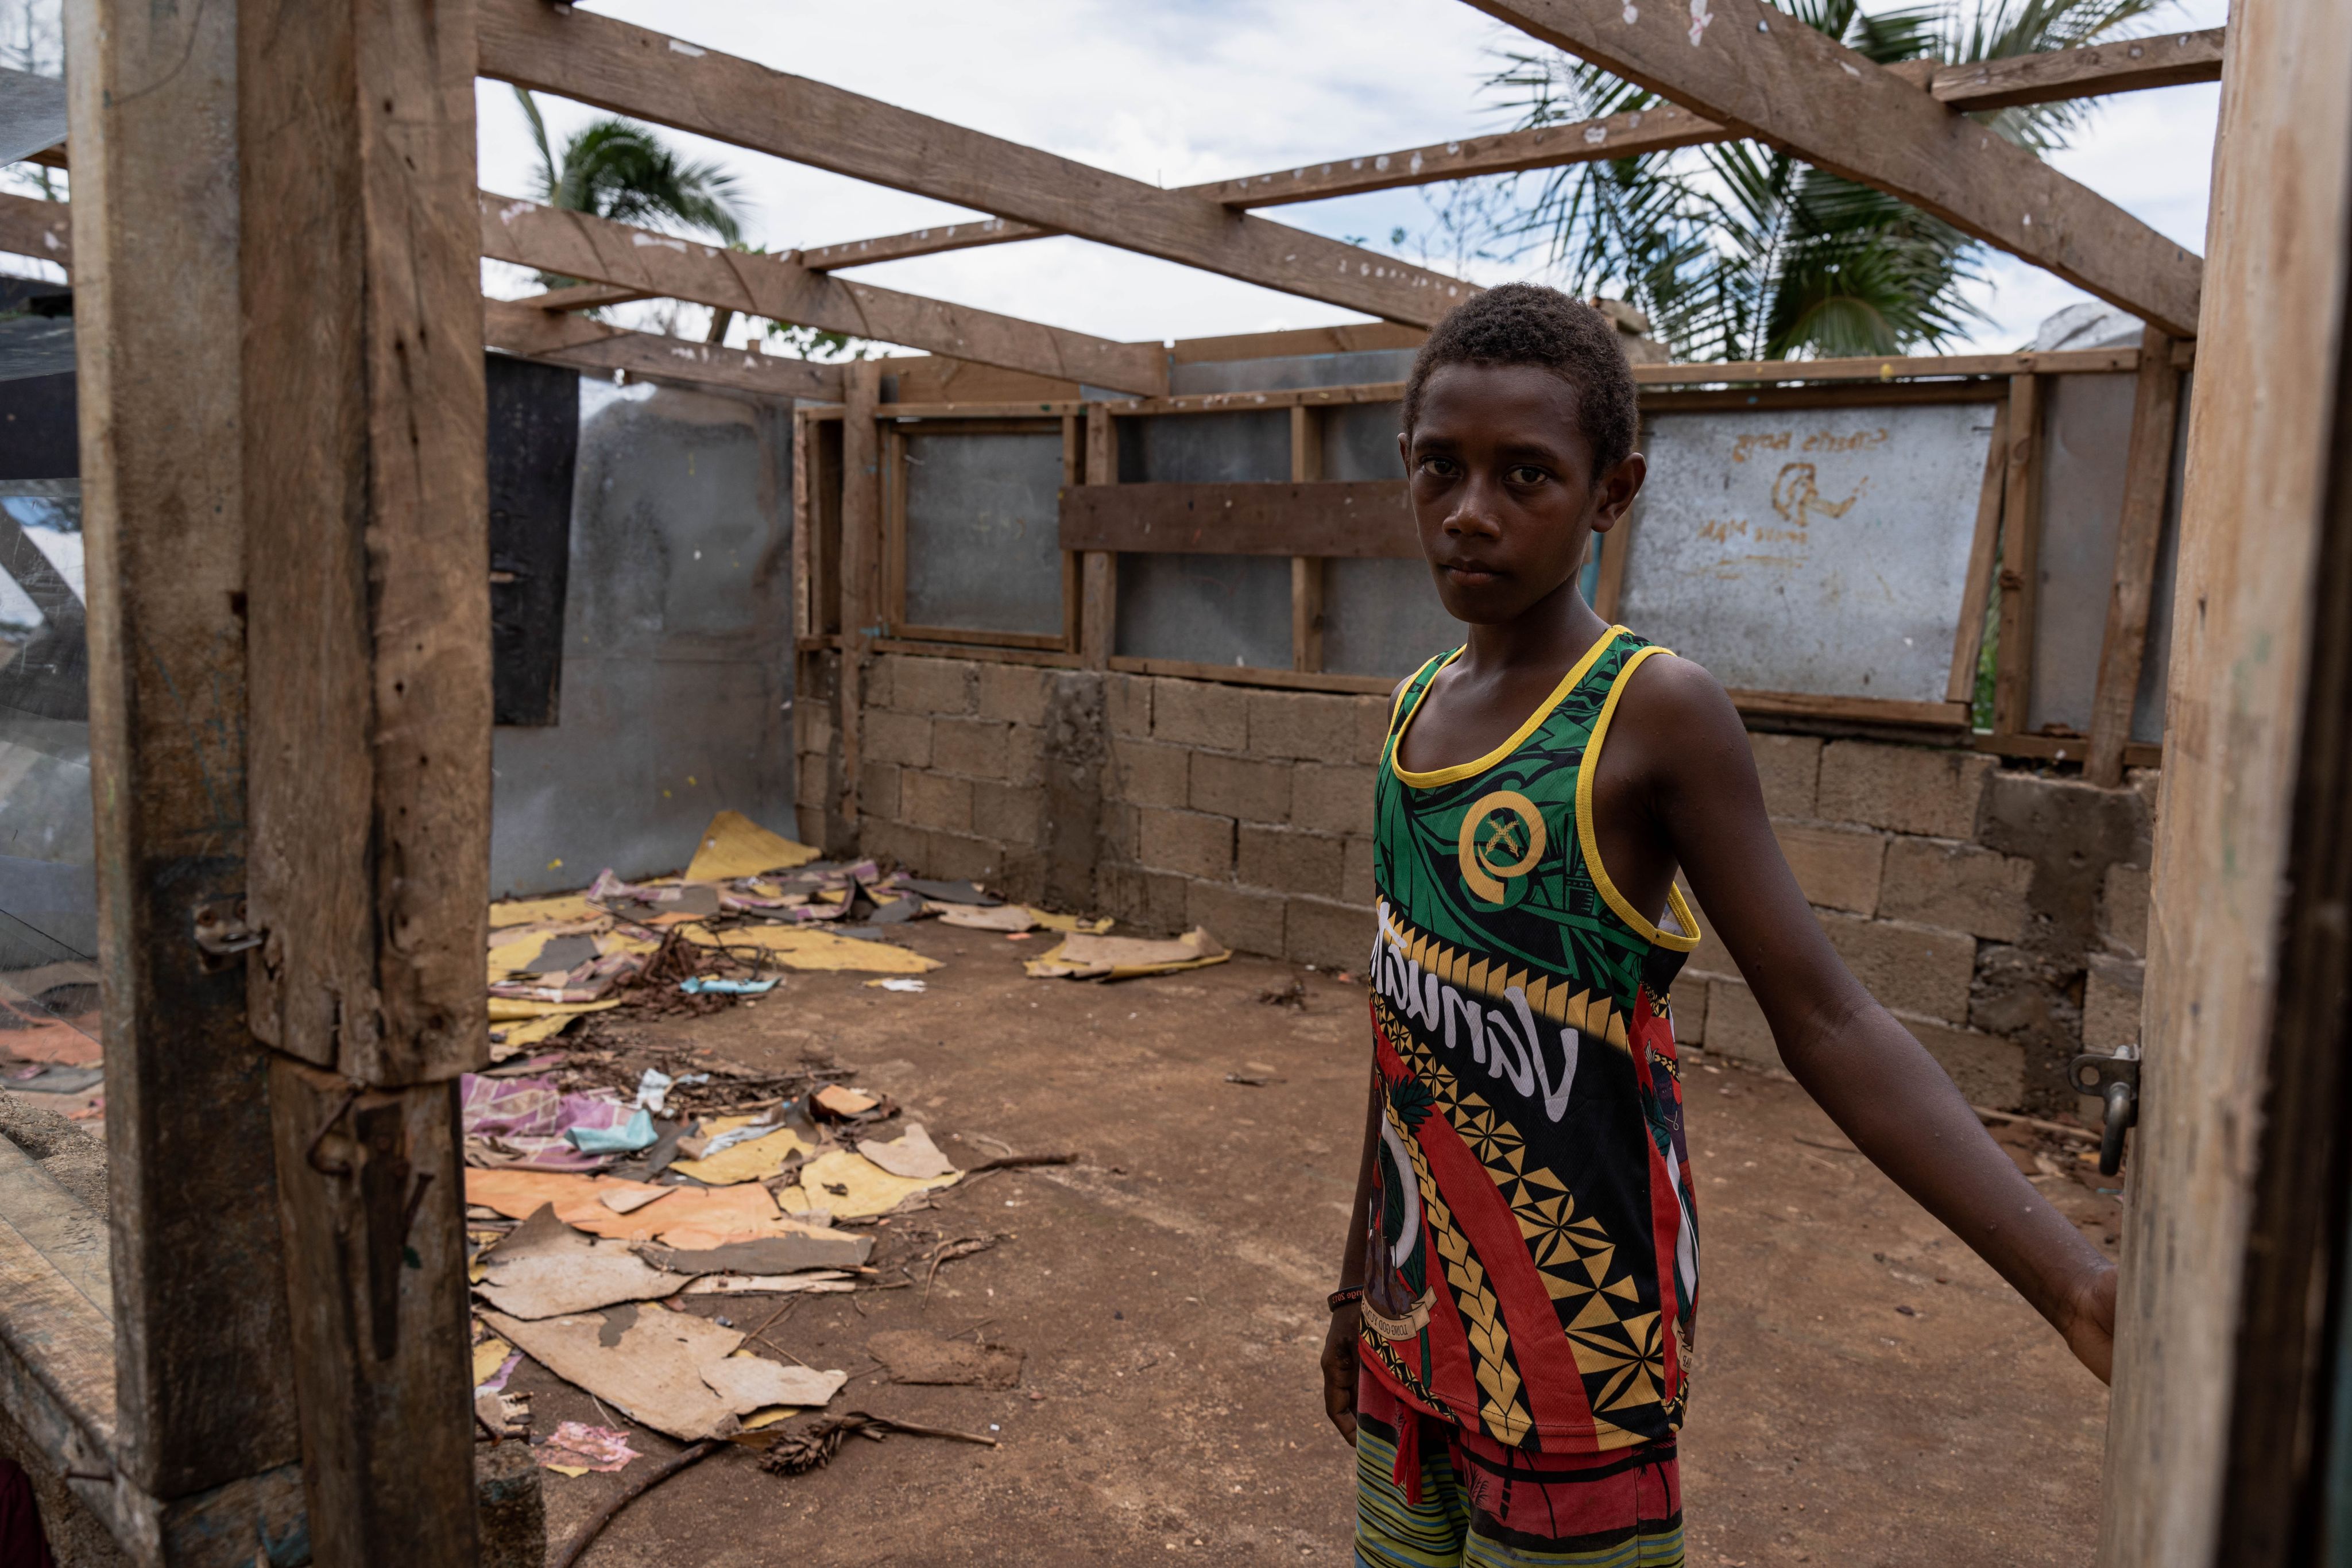 Noa*, 11, pictured inside his damaged school following back-to-back tropical cyclones - Judy and Kevin - that hit his Pacific Island nation of Vanuatu.